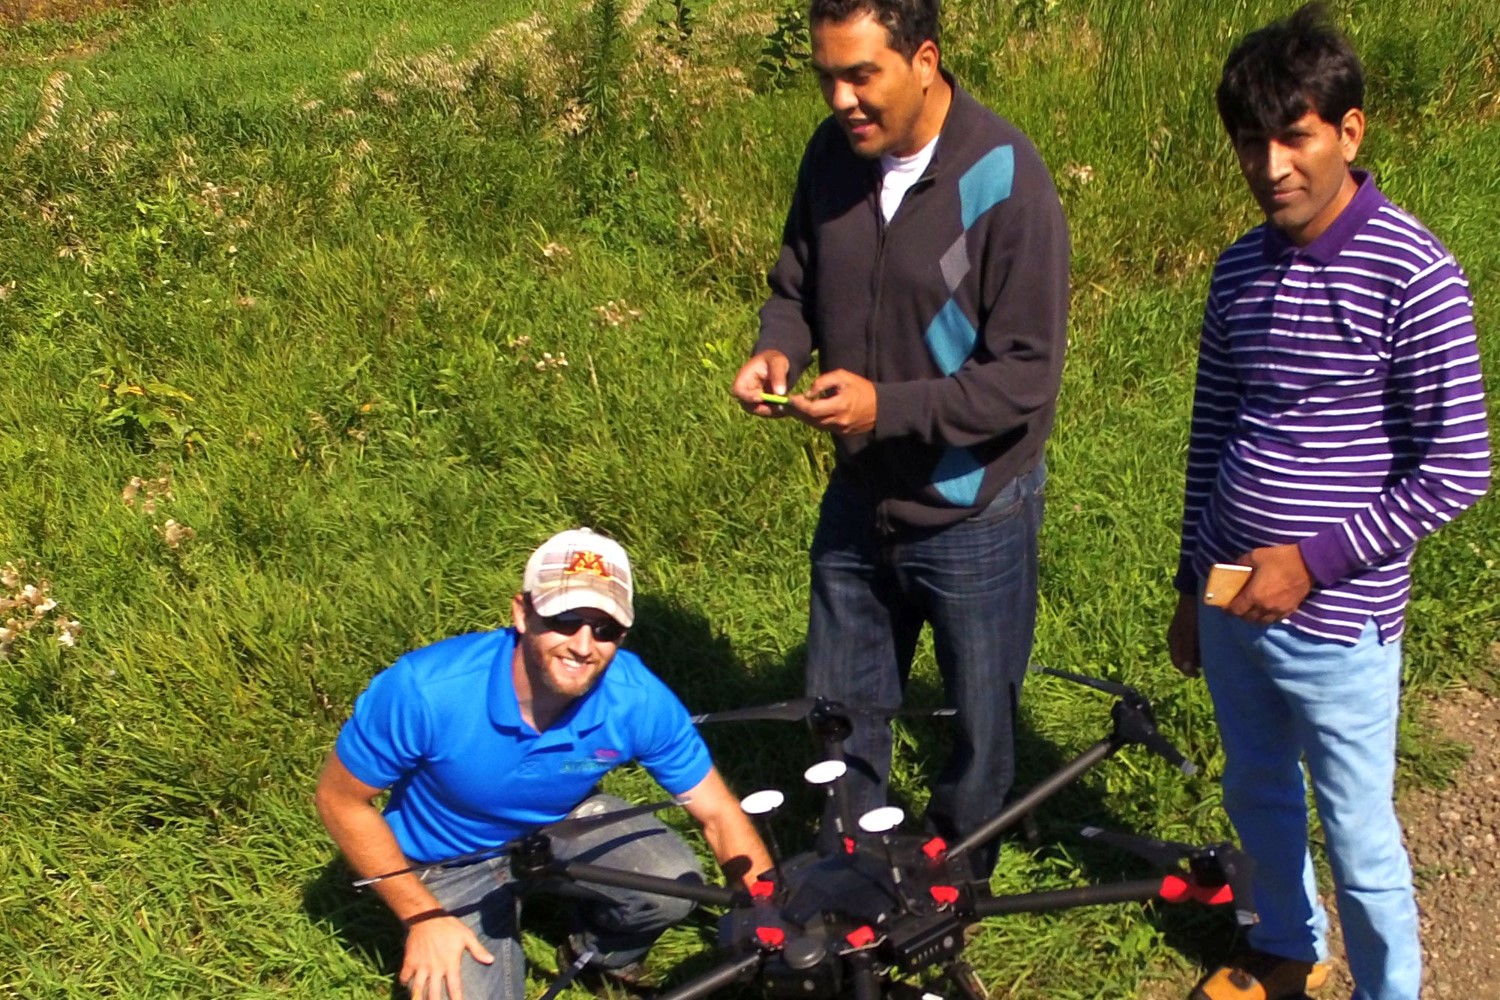 Tyler, Aicam, and Muhammad setting up the Matrice 600 Pro drone prior to  collecting aerial imagery.